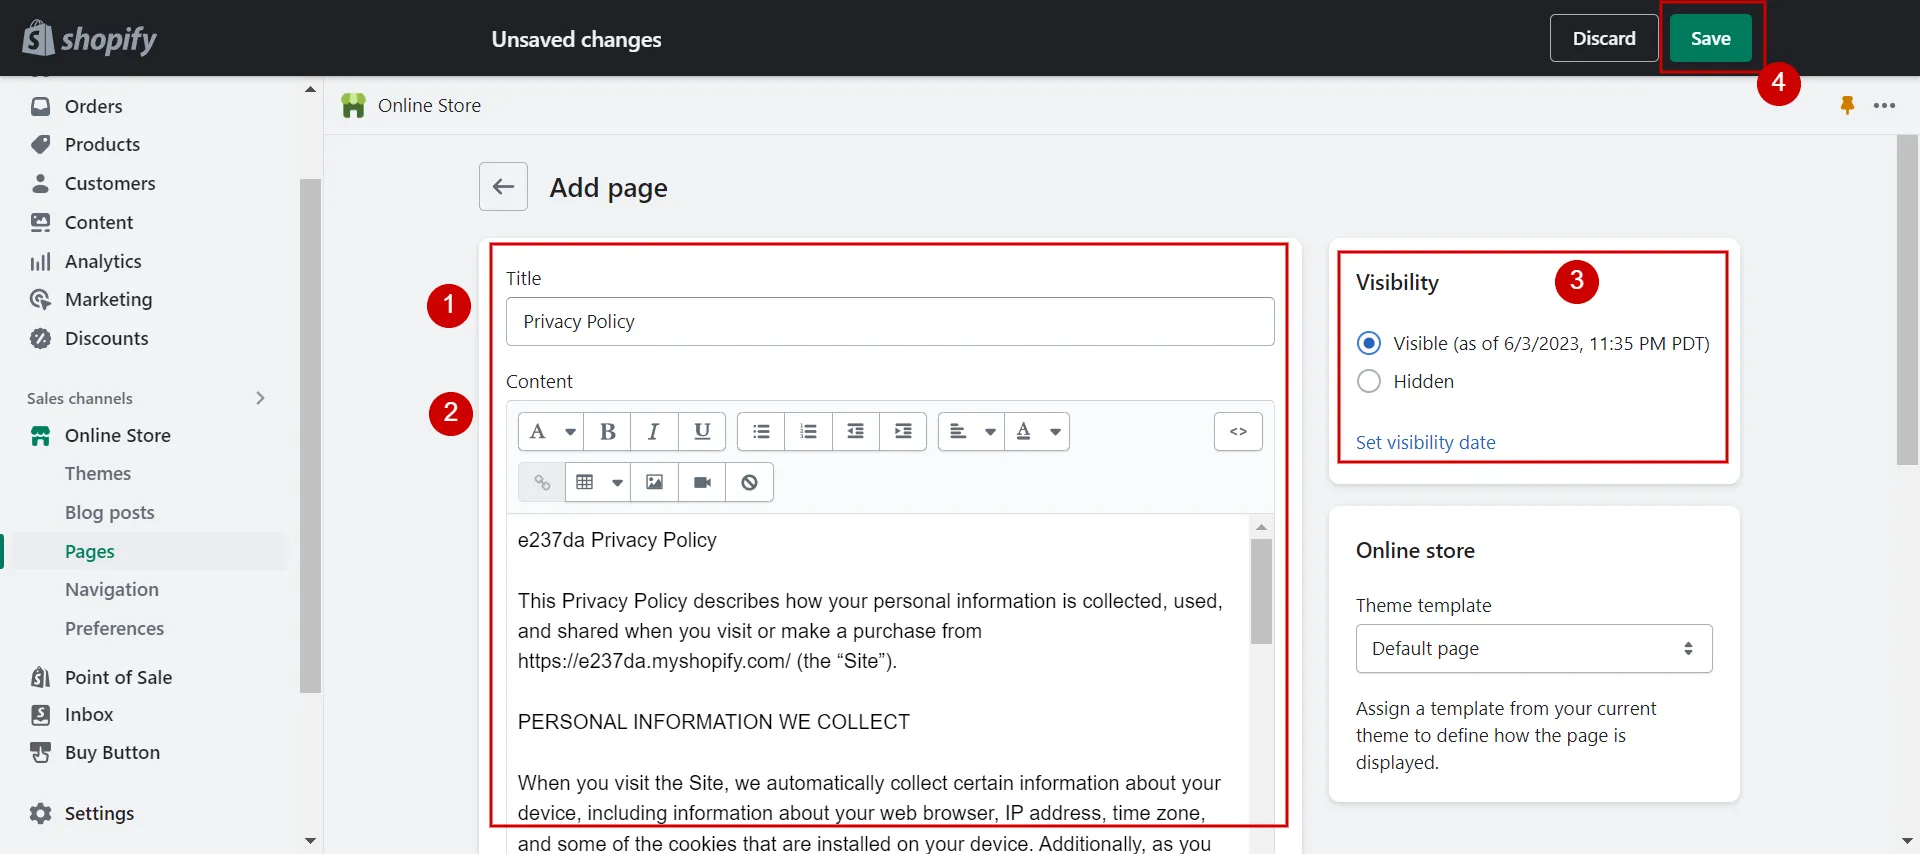 How to add a privacy policy page on Shopify